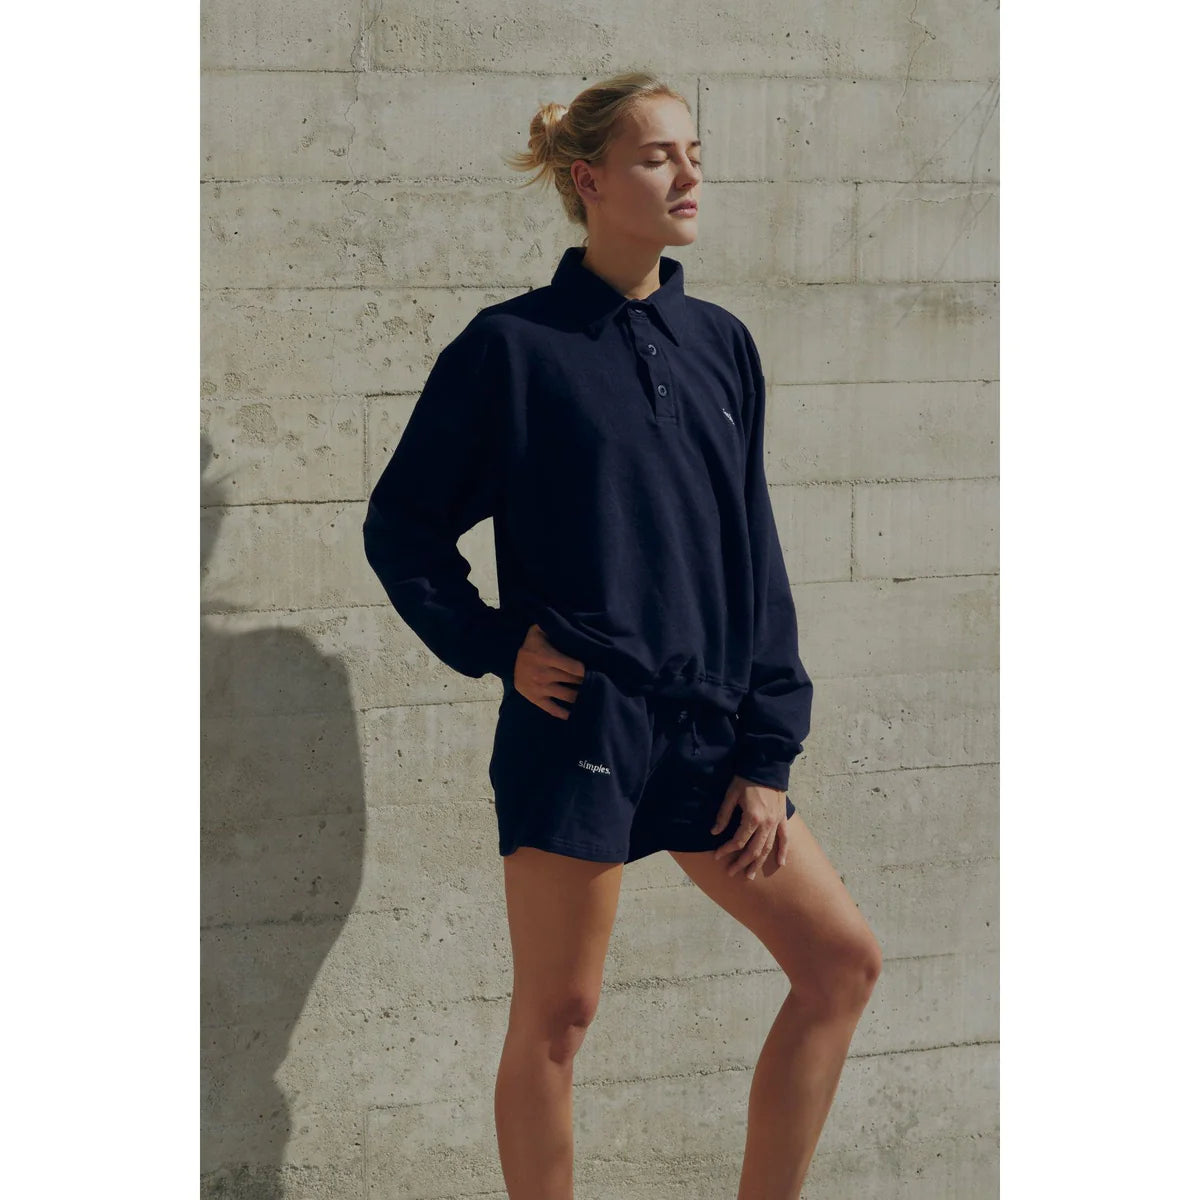 a blonde model showing how to style navy blue with shorts and a shirt in this color